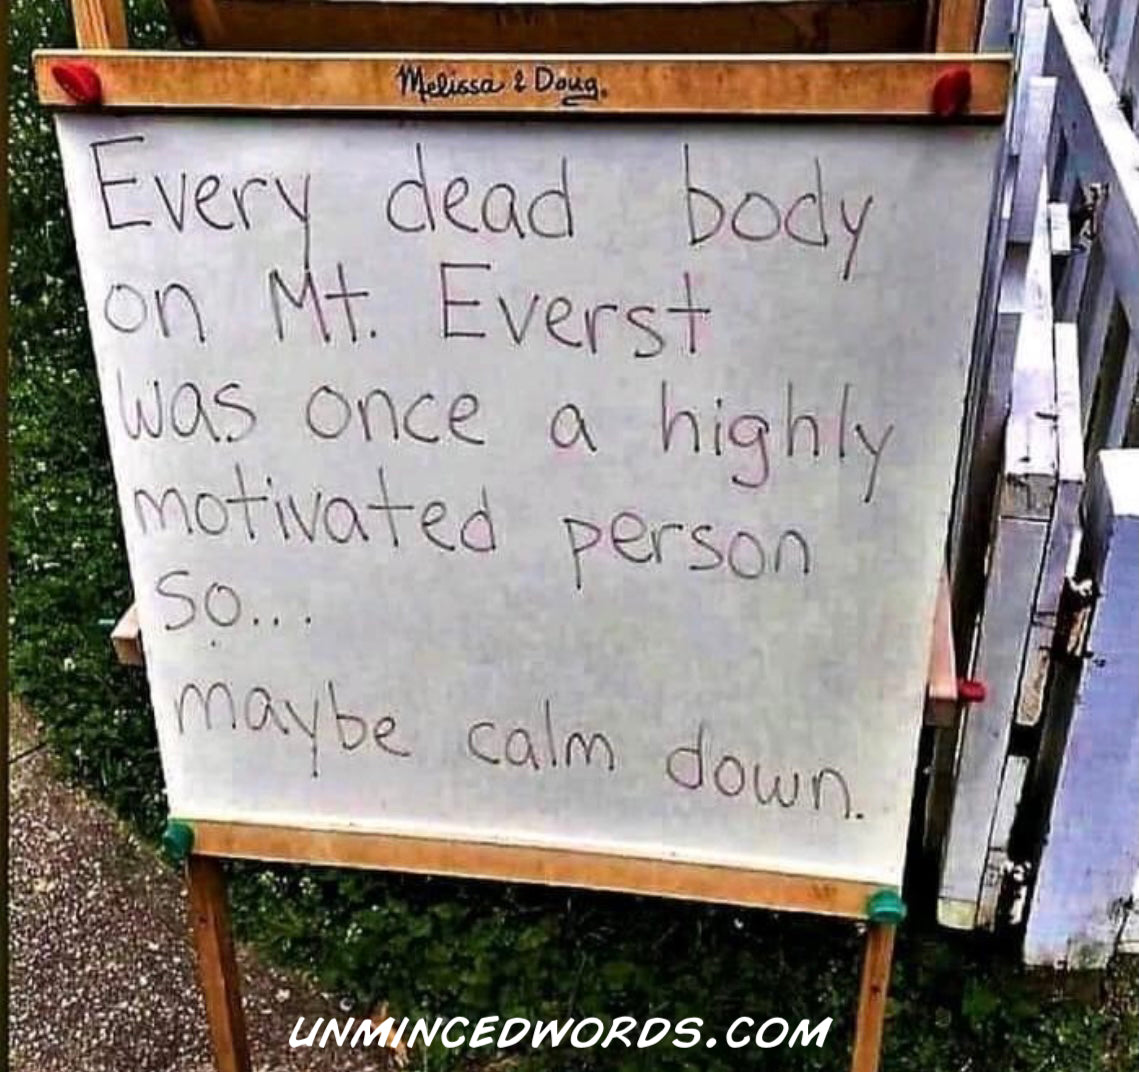 The suggestion for motivated people to calm down is hilarious